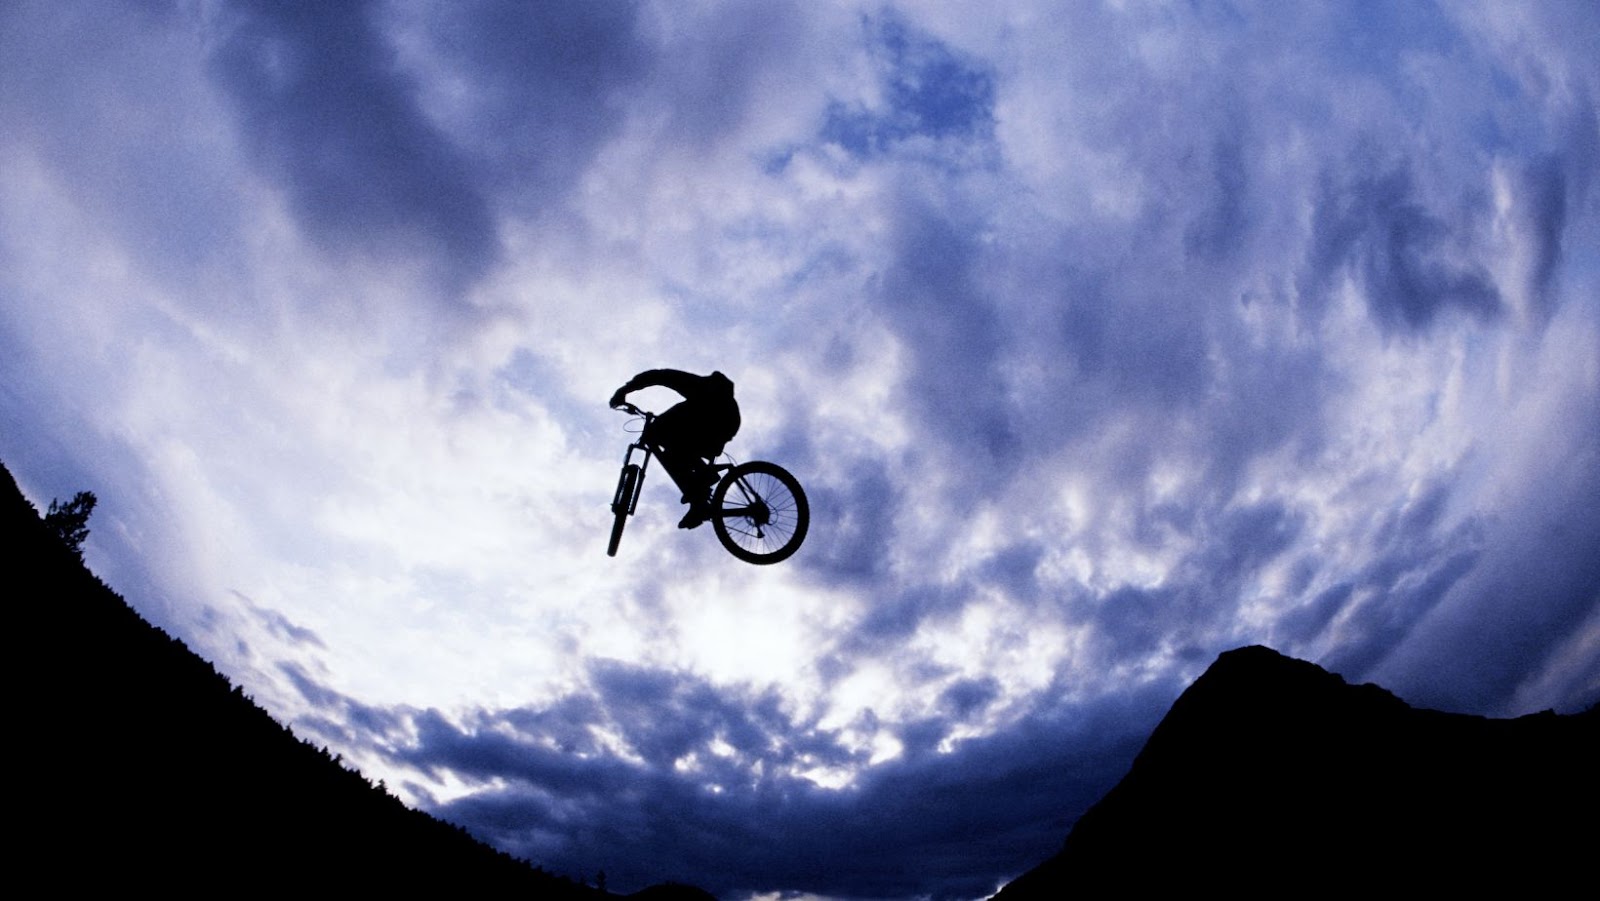 The Ultimate Freestyle Biking Experience with Mongoose Dirt Jumper